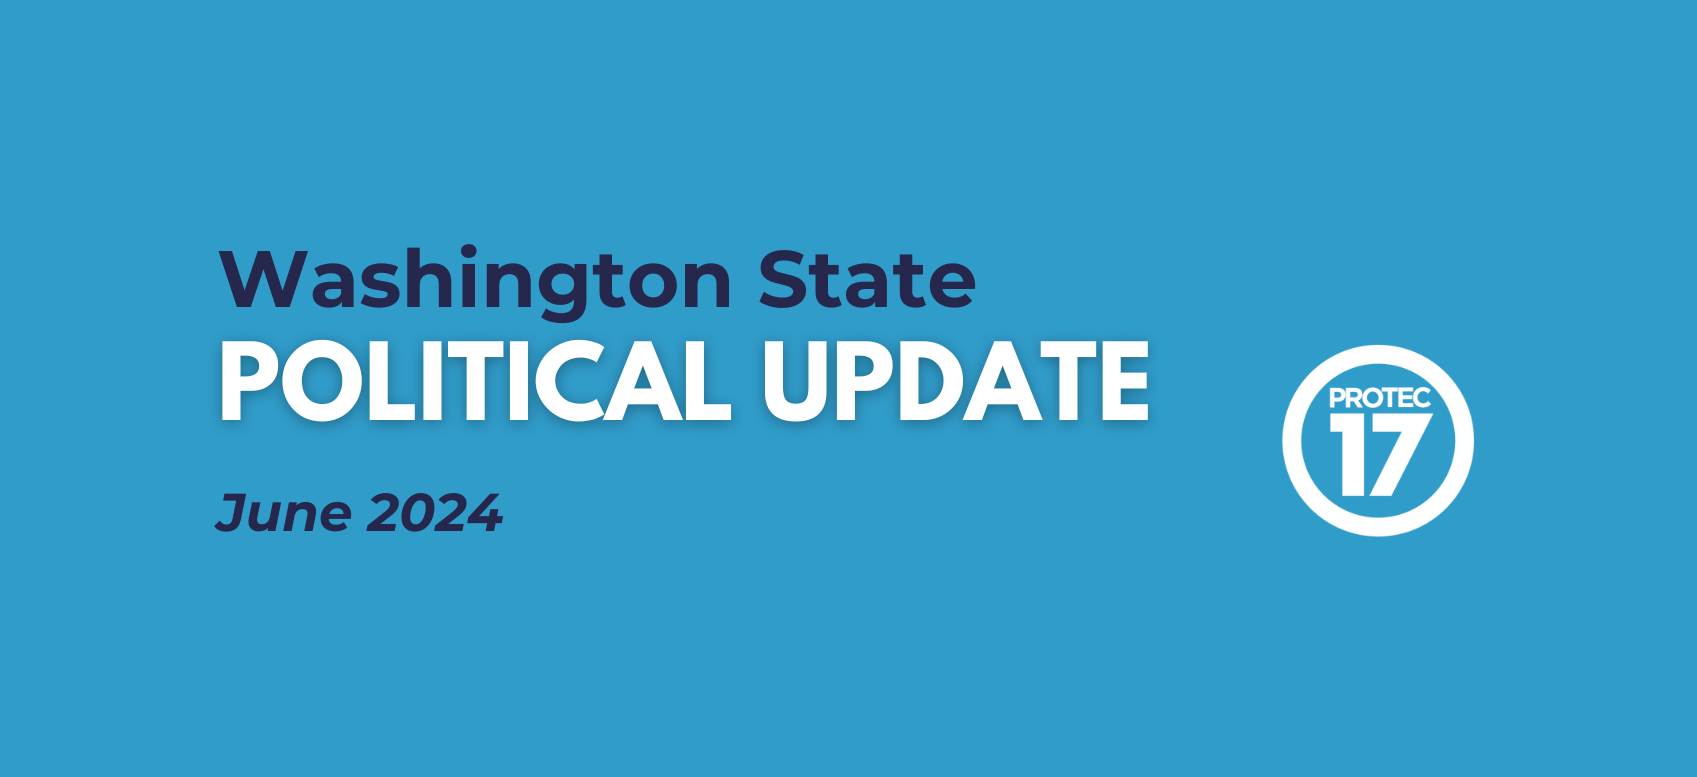 On a light blue background the text reads, "Washington State POLITICAL UPDATE | June 2024" The PROTEC17 logo is in the bottom right.